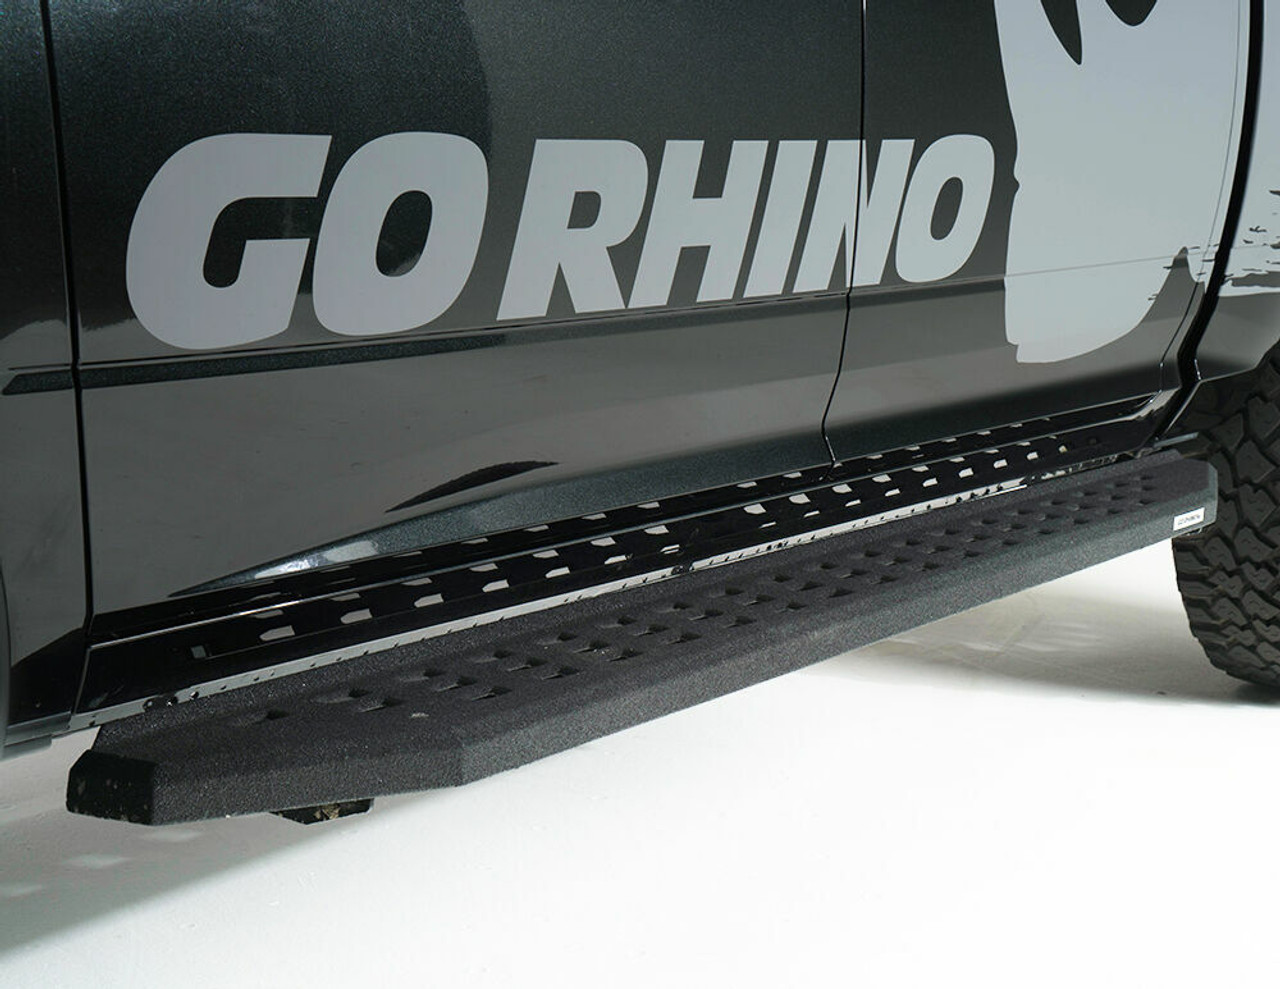 Go Rhino 6941558720T Ford, F-150 Raptor, 2017 - 2021, RB20 Running boards - Complete Kit:  2 pair RB20 Drop Steps, Galvanized Steel, Protective Bedliner coating, 69400087T RB20 + 6941555 RB Brackets + (2) 69420000T Drop Down Step